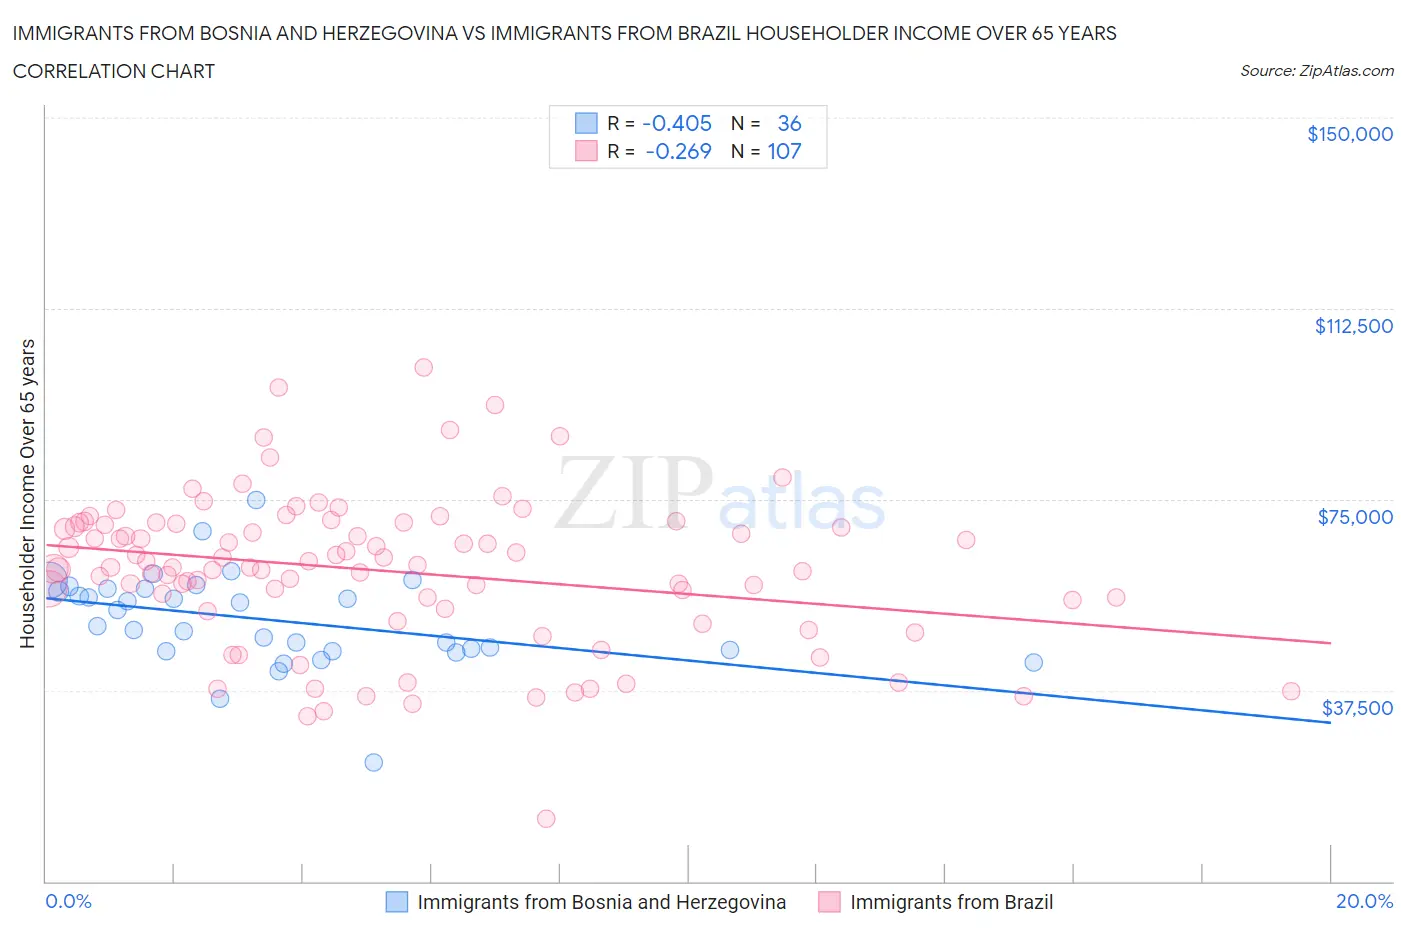 Immigrants from Bosnia and Herzegovina vs Immigrants from Brazil Householder Income Over 65 years